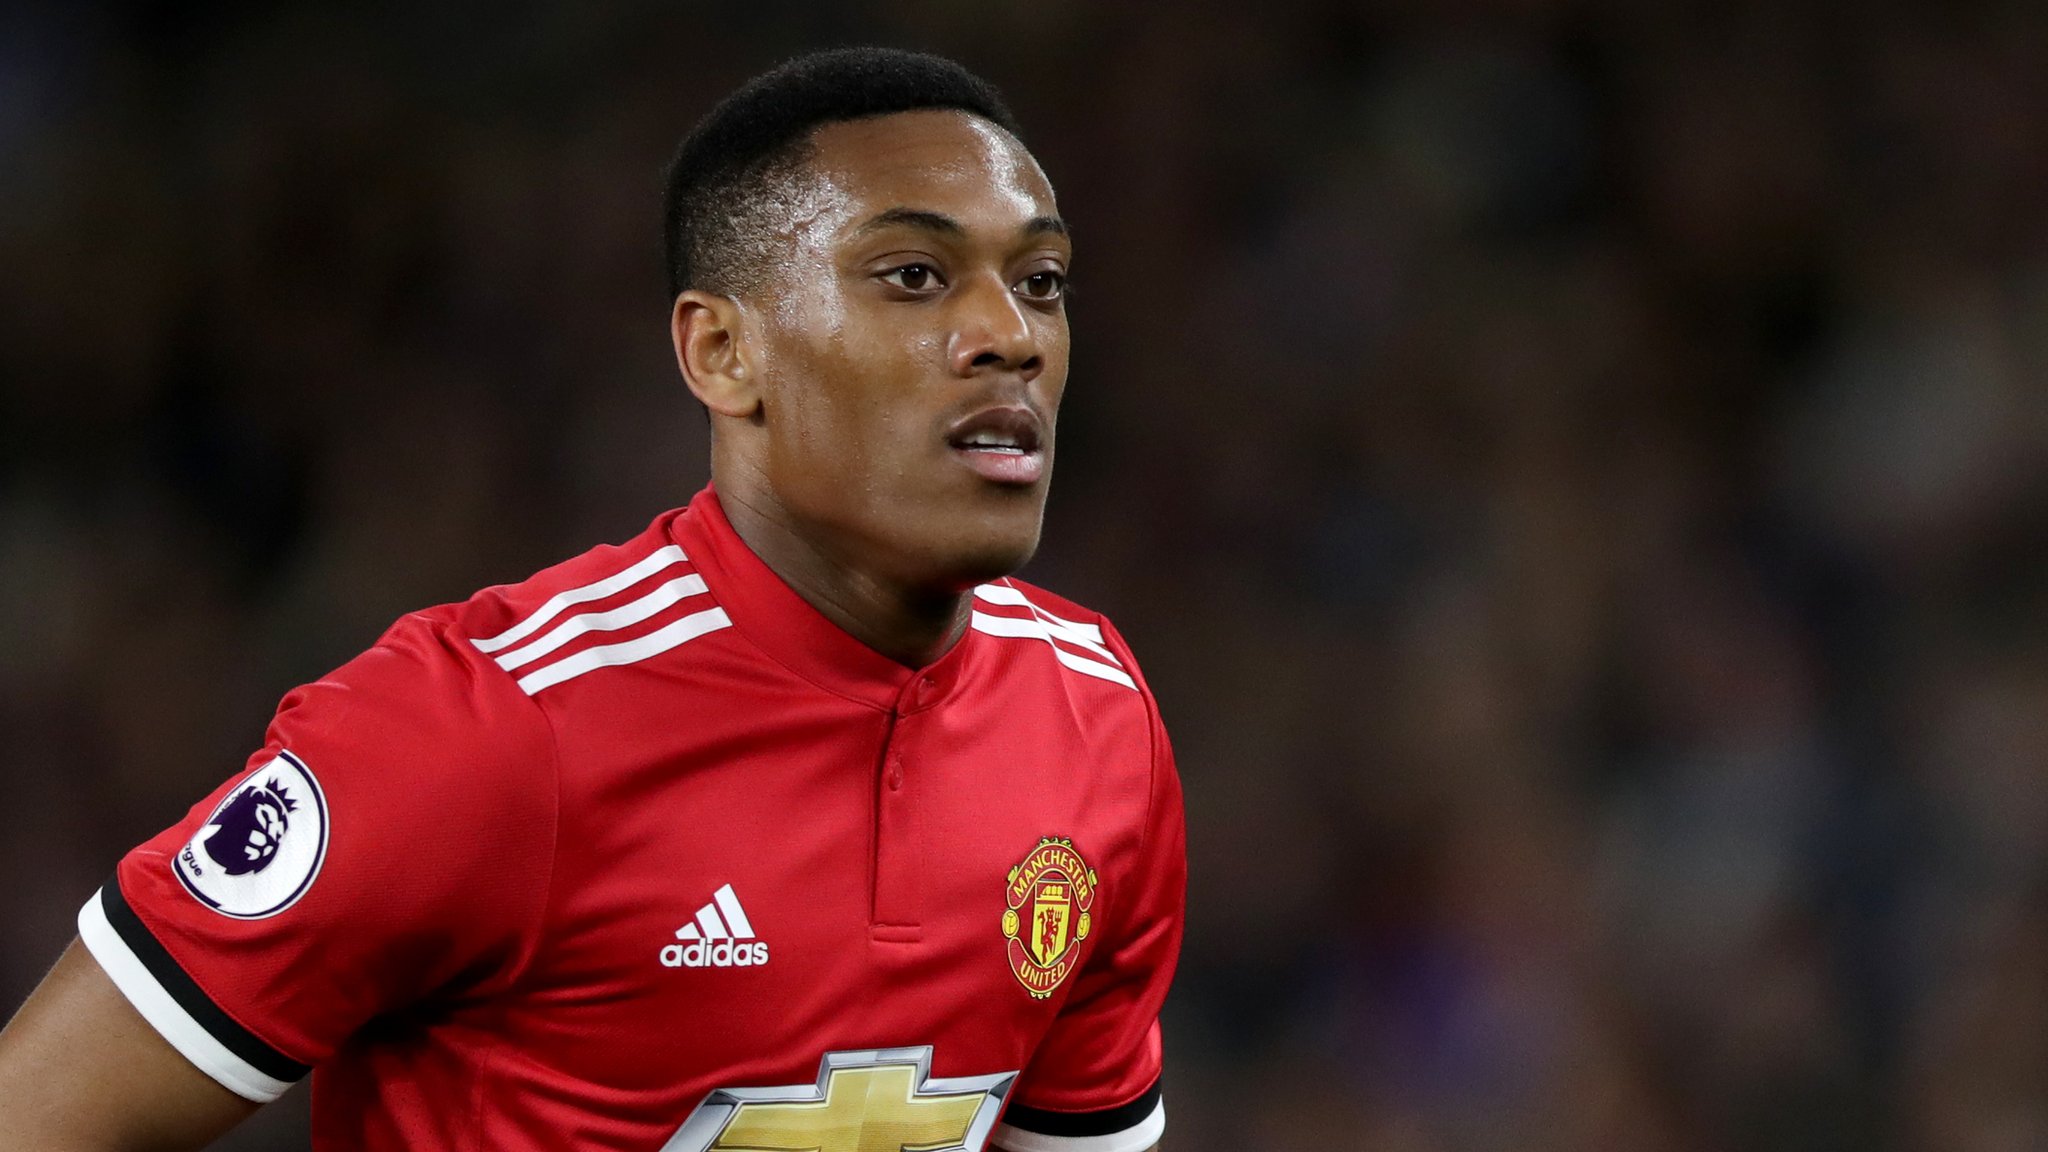 Martial wants to leave Man Utd, says agent